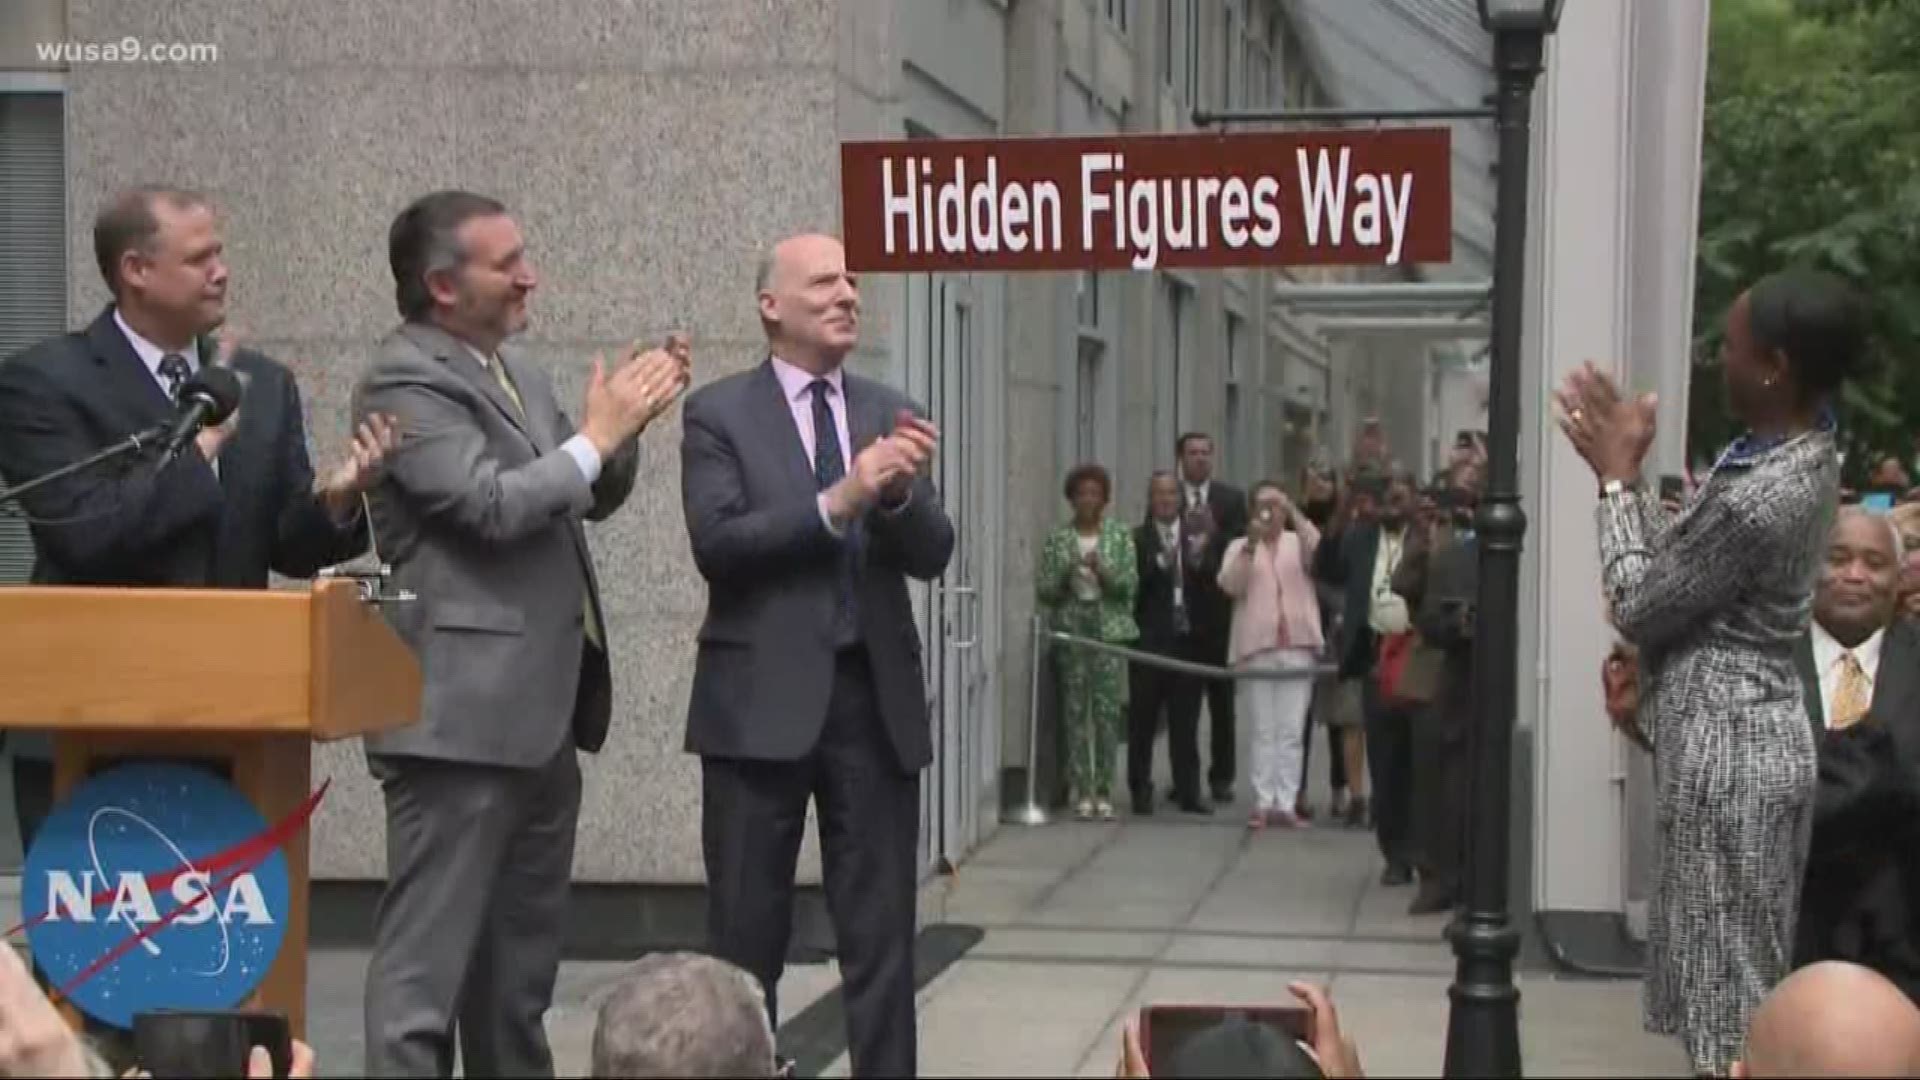 This street is the latest to receive a special sign to signify historic groups, people or institutions.